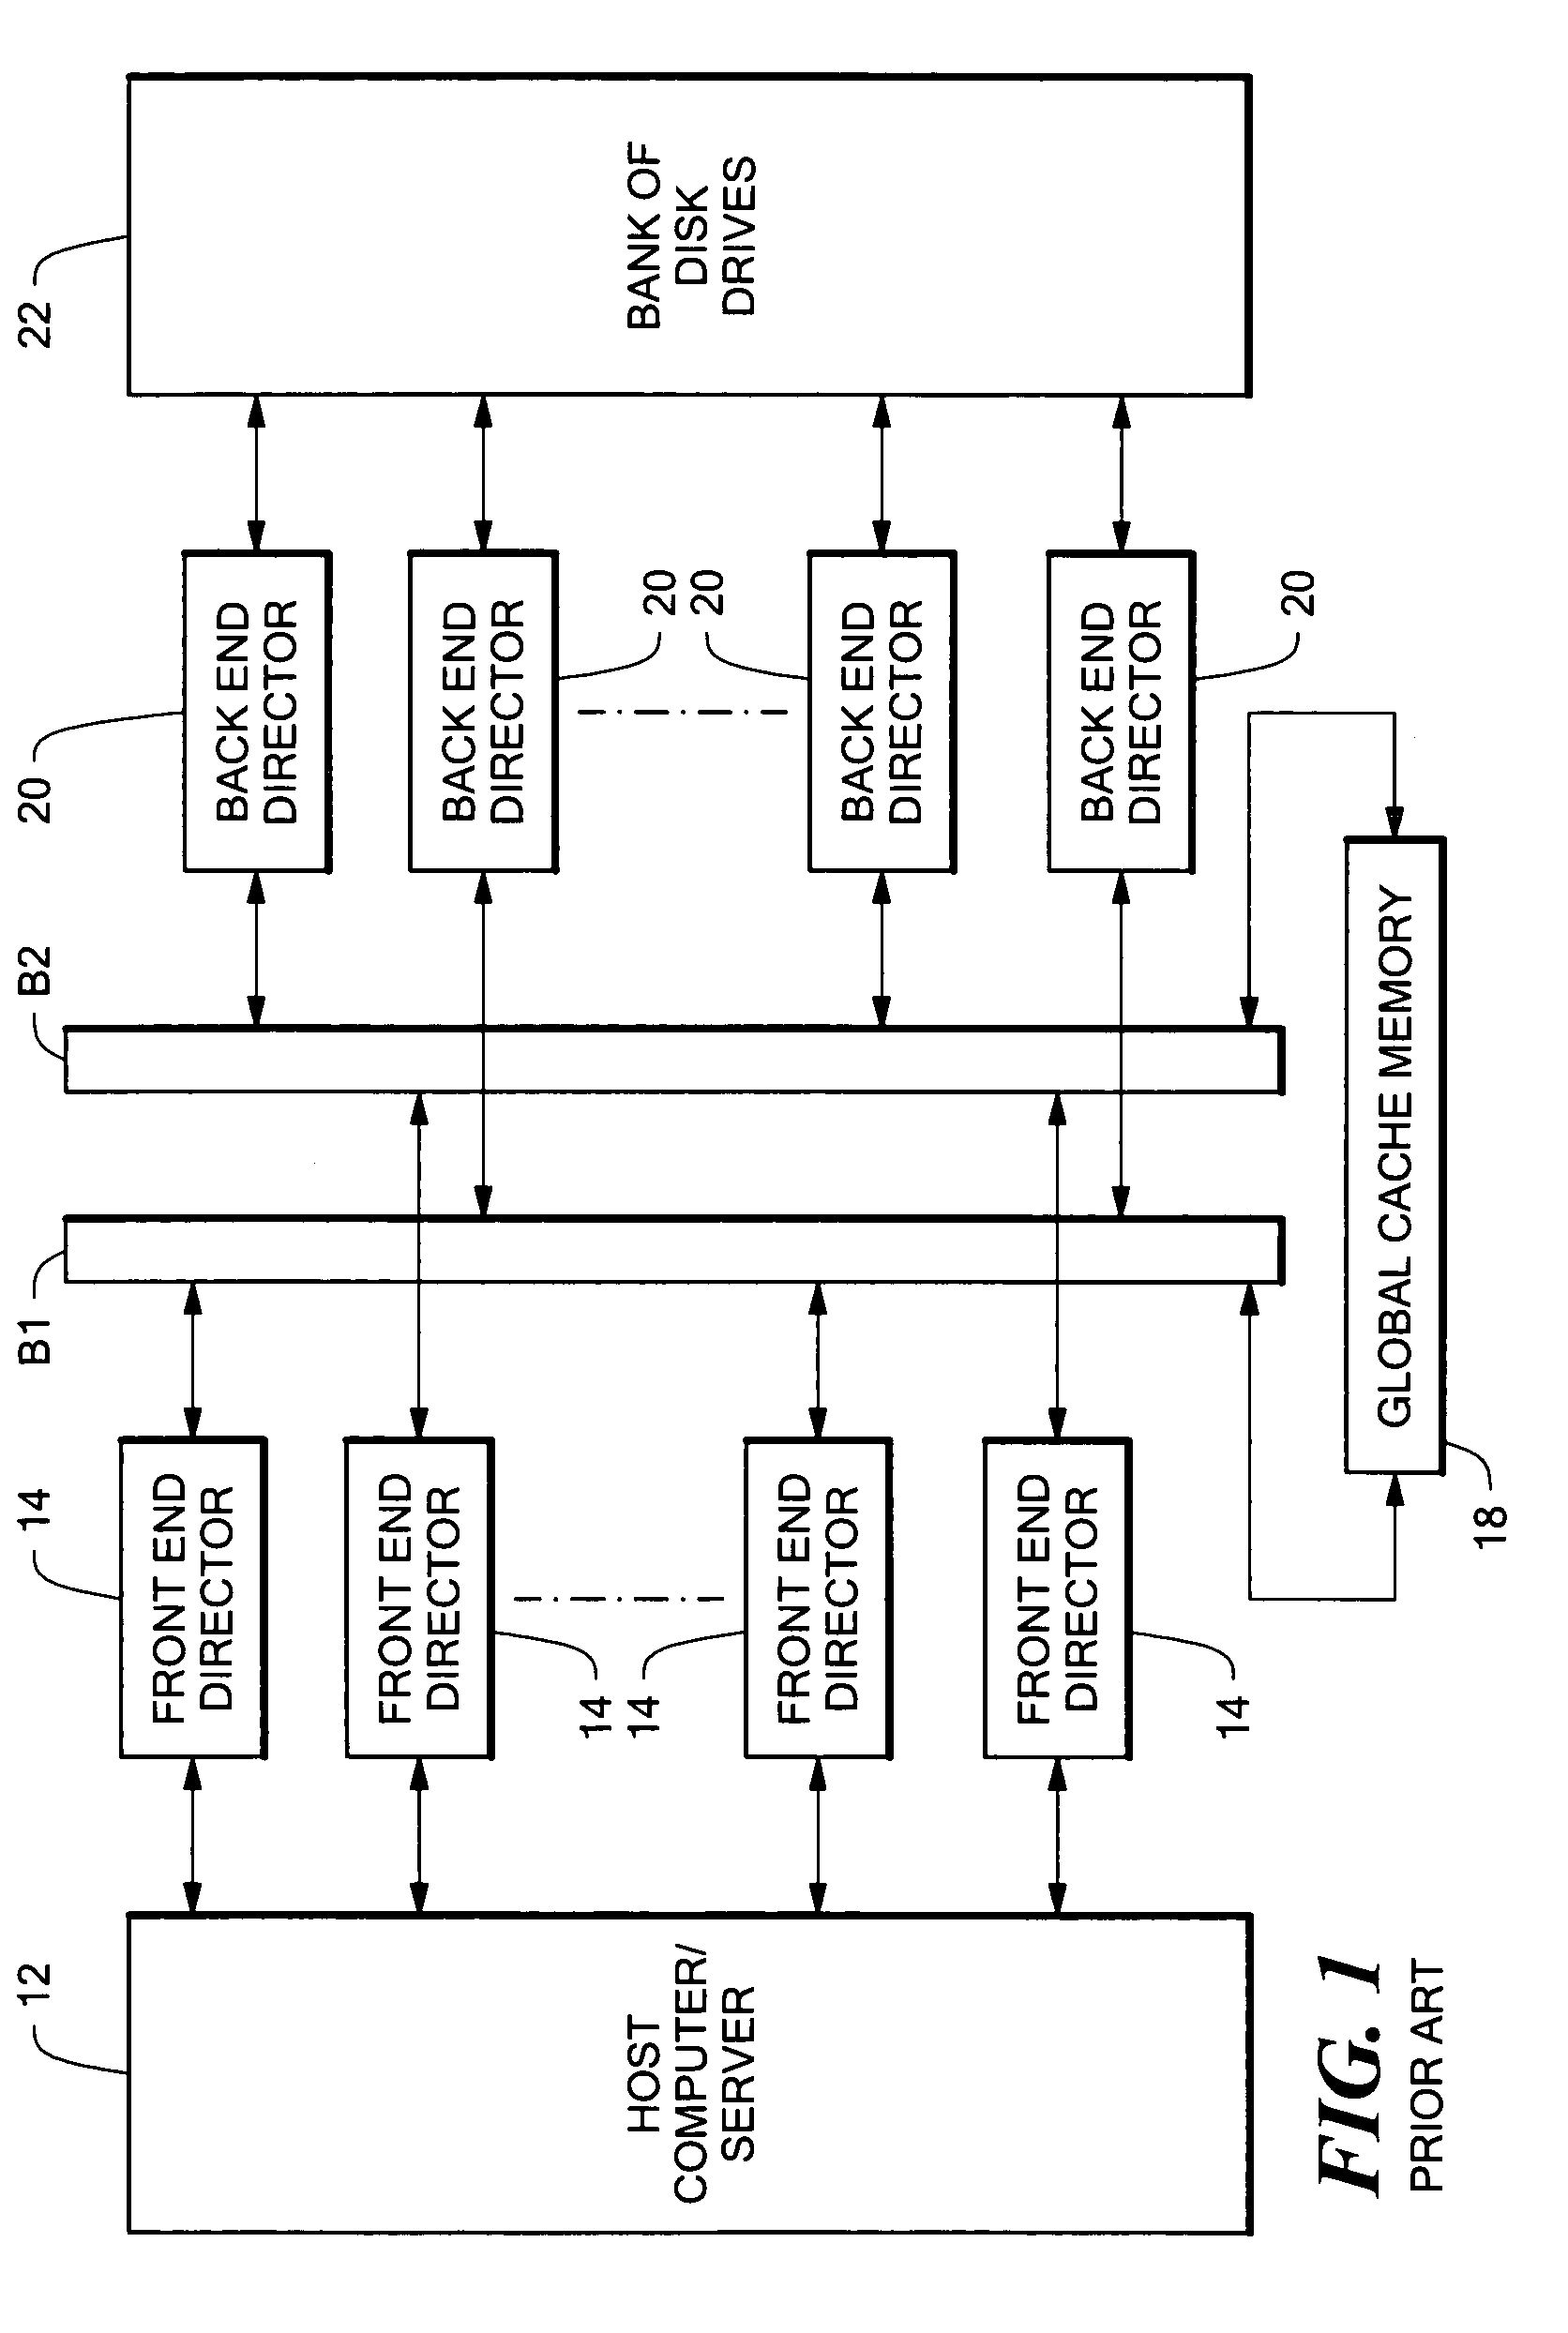 Data storage system having cache memory manager with packet switching network